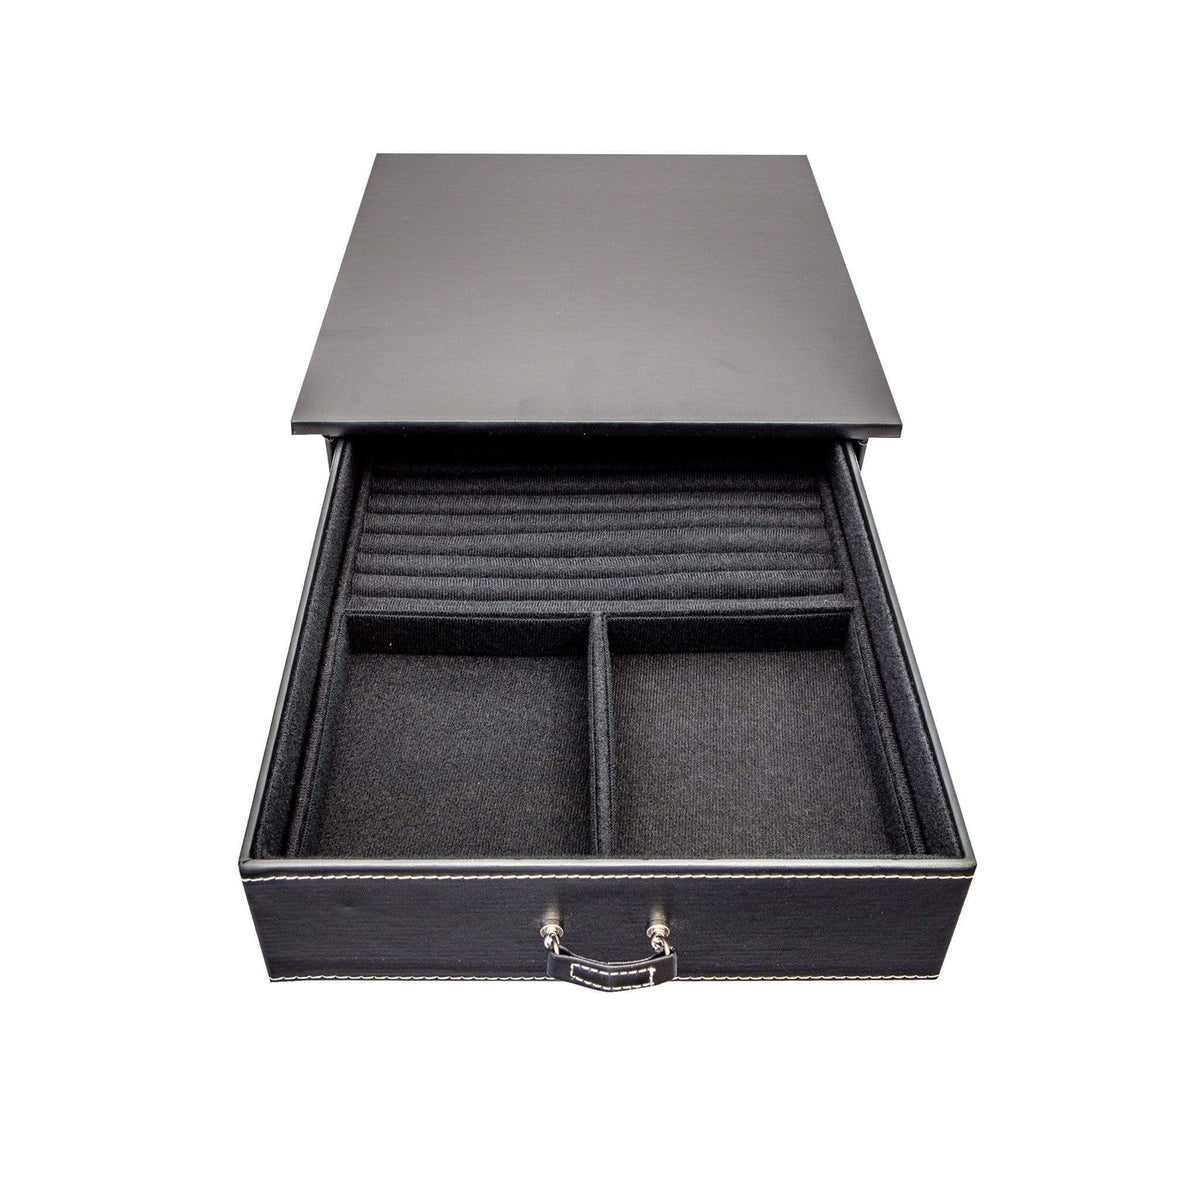 Accessory - Storage - Jewelry Drawer - 8.5 inch - under shelf mount - 23-50 size safes | Liberty Safe Norcal.